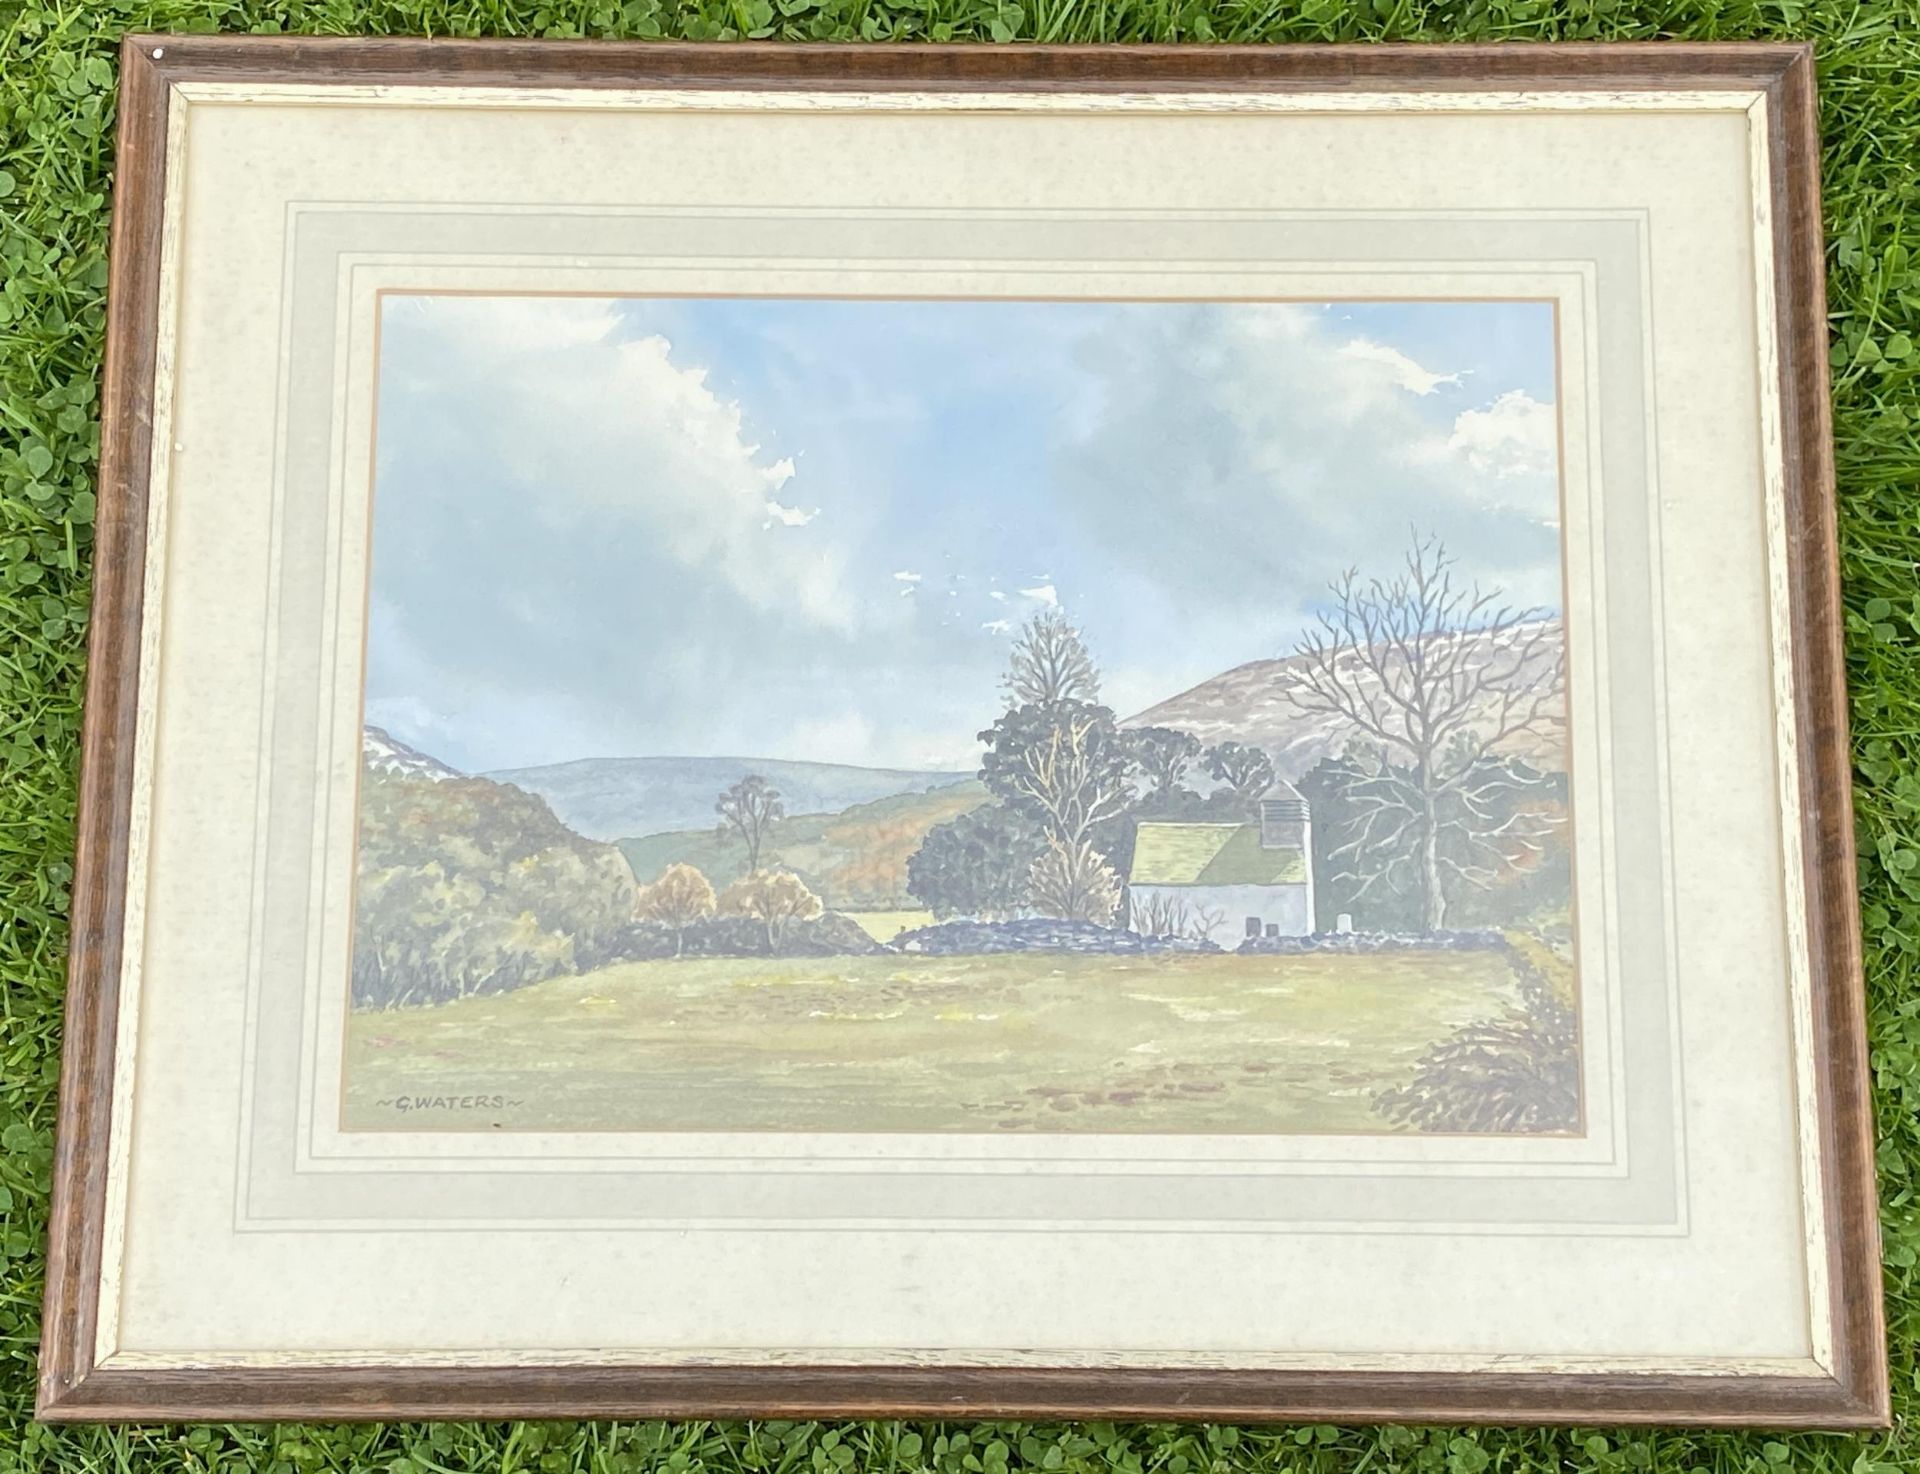 A FRAMED G.WATERS WATERCOLOUR OF CAPEL-Y-FFIN